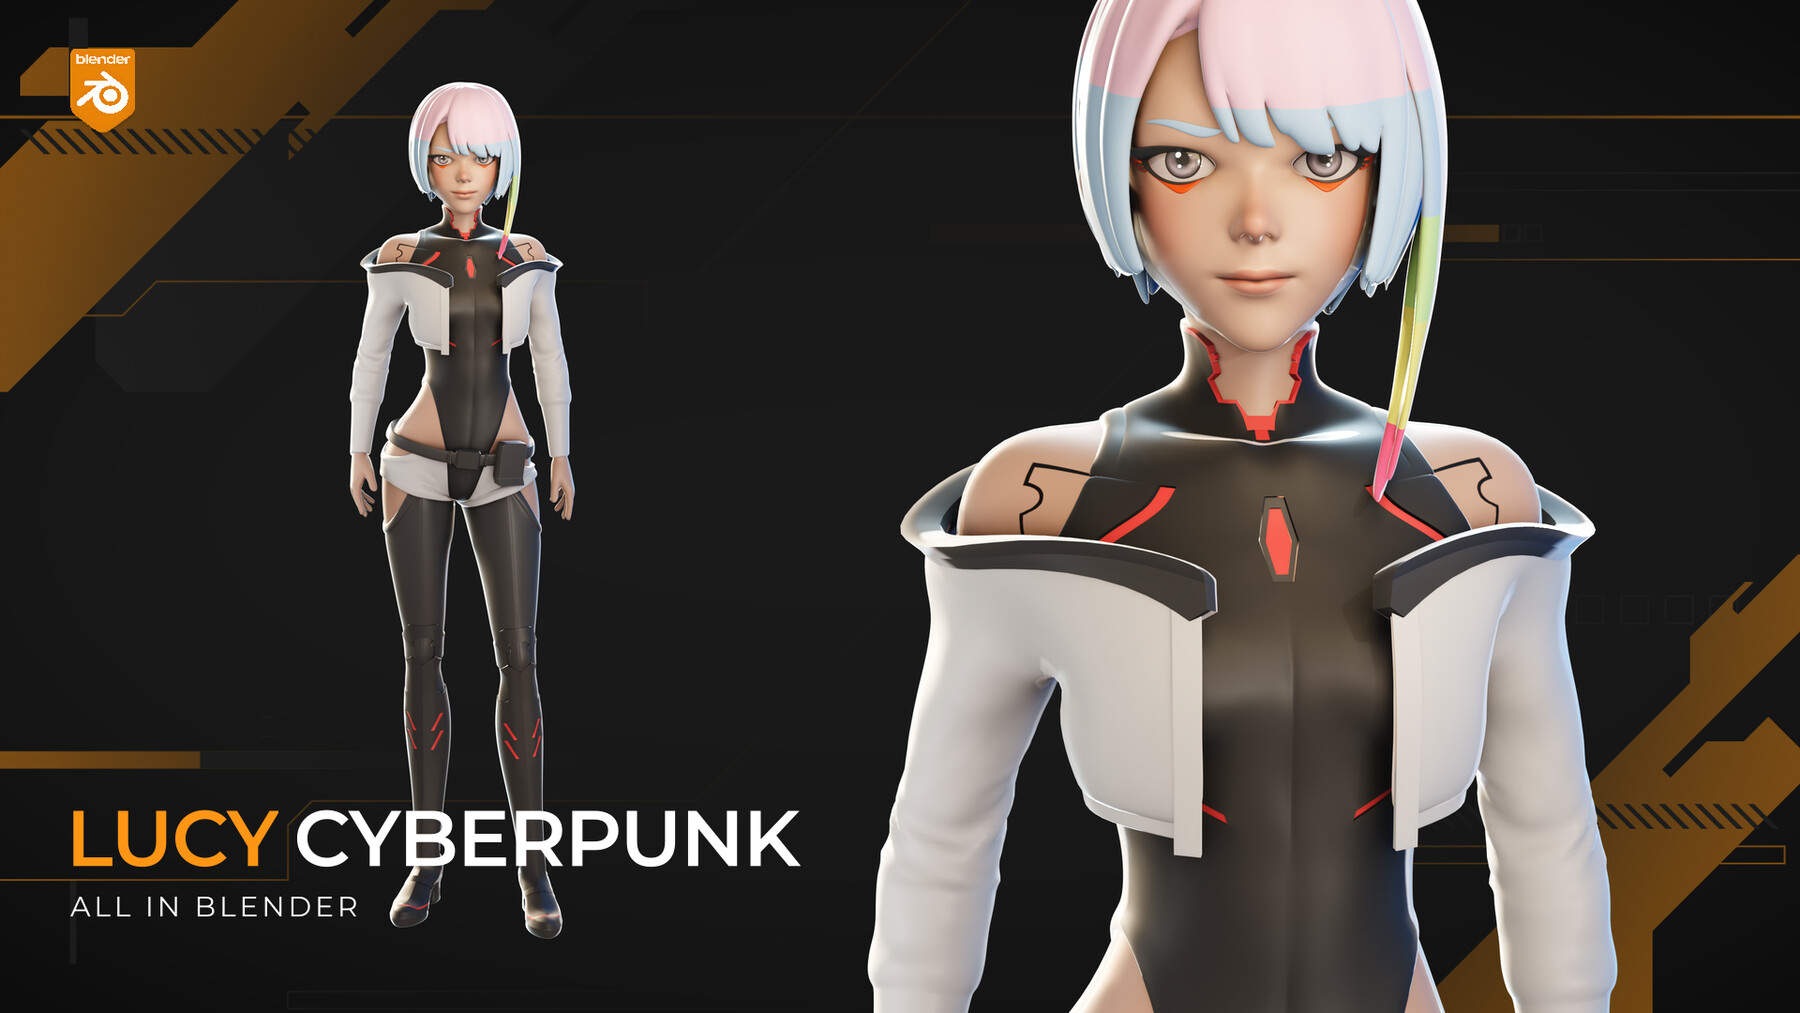 How Old Are the Characters in Cyberpunk: Edgerunners?